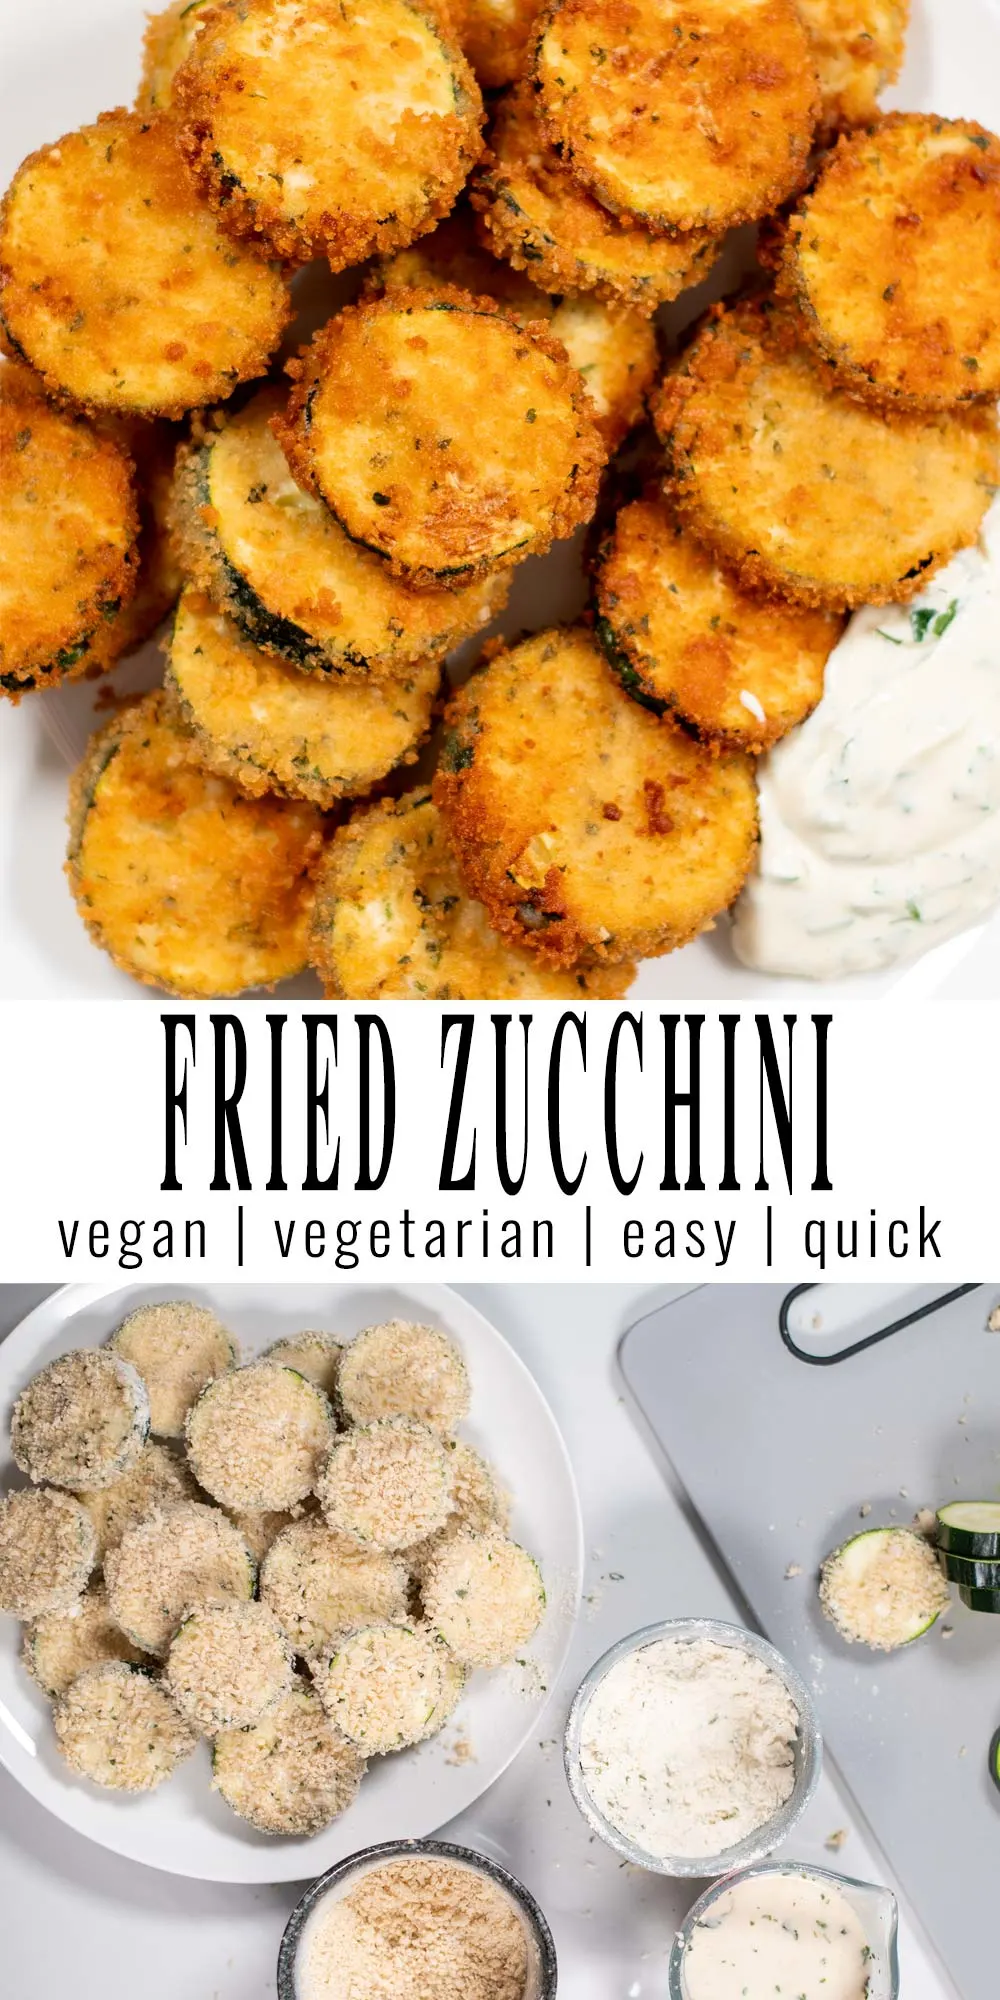 Collage of two photos of Fried Zucchini with recipe title text.